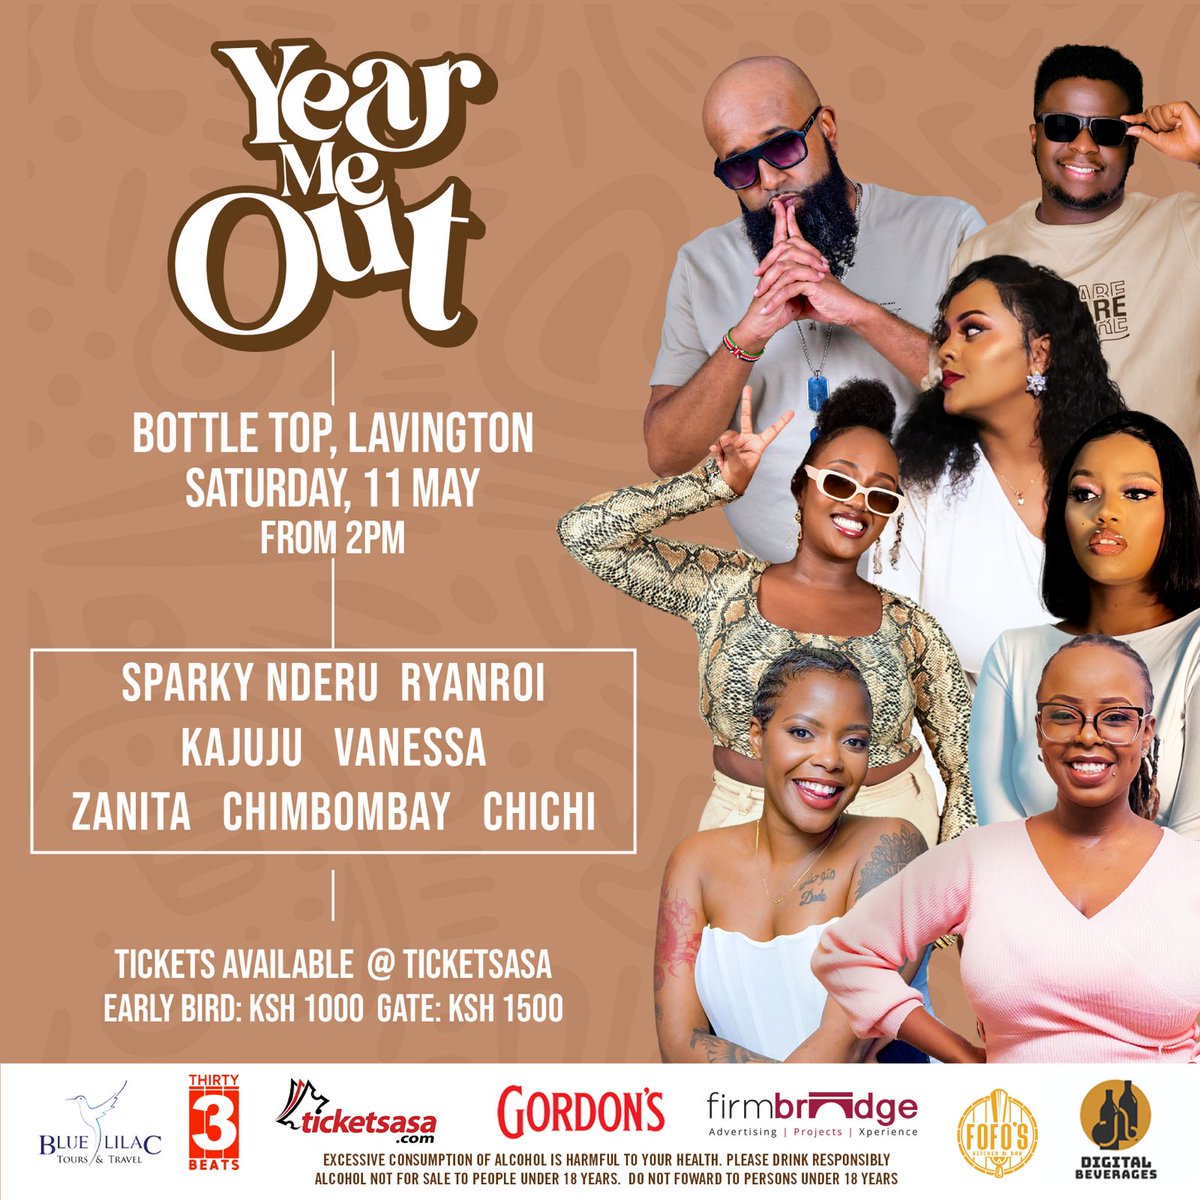 #bestholidaypartner
We are delighted to be partnering with  Year Me Out  as they throw the ultimate party experience!
This Saturday, all roads lead to The Bottle Tops for the biggest party in Nairobi.

See you there. 😎
#YMKOe #party